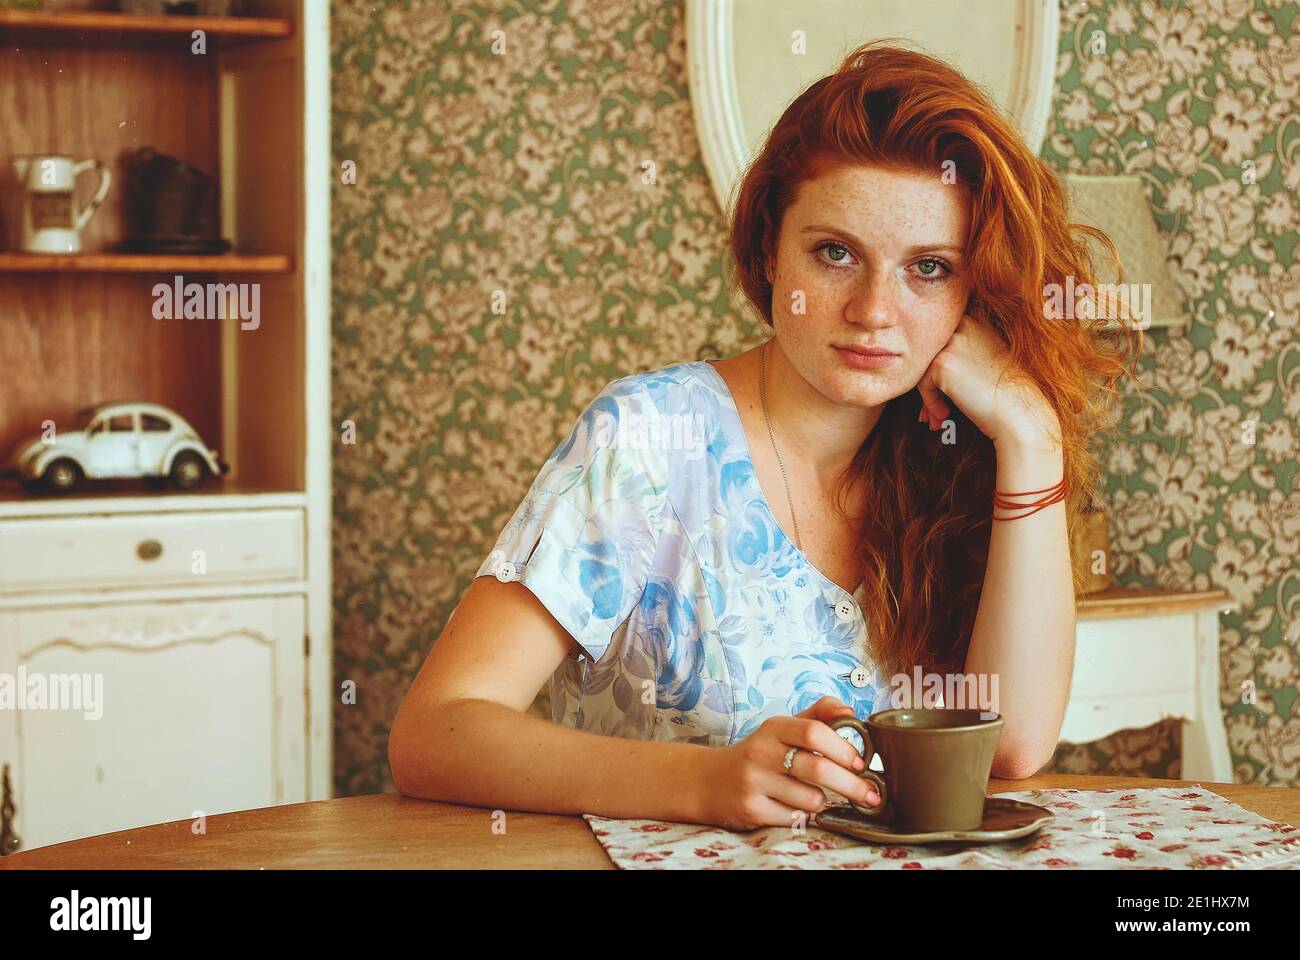 Portrait of young redhead woman  with freckles drinking coffee in sunny morning at home. Natural beauty. Woman's Day. Still life. Stock Photo